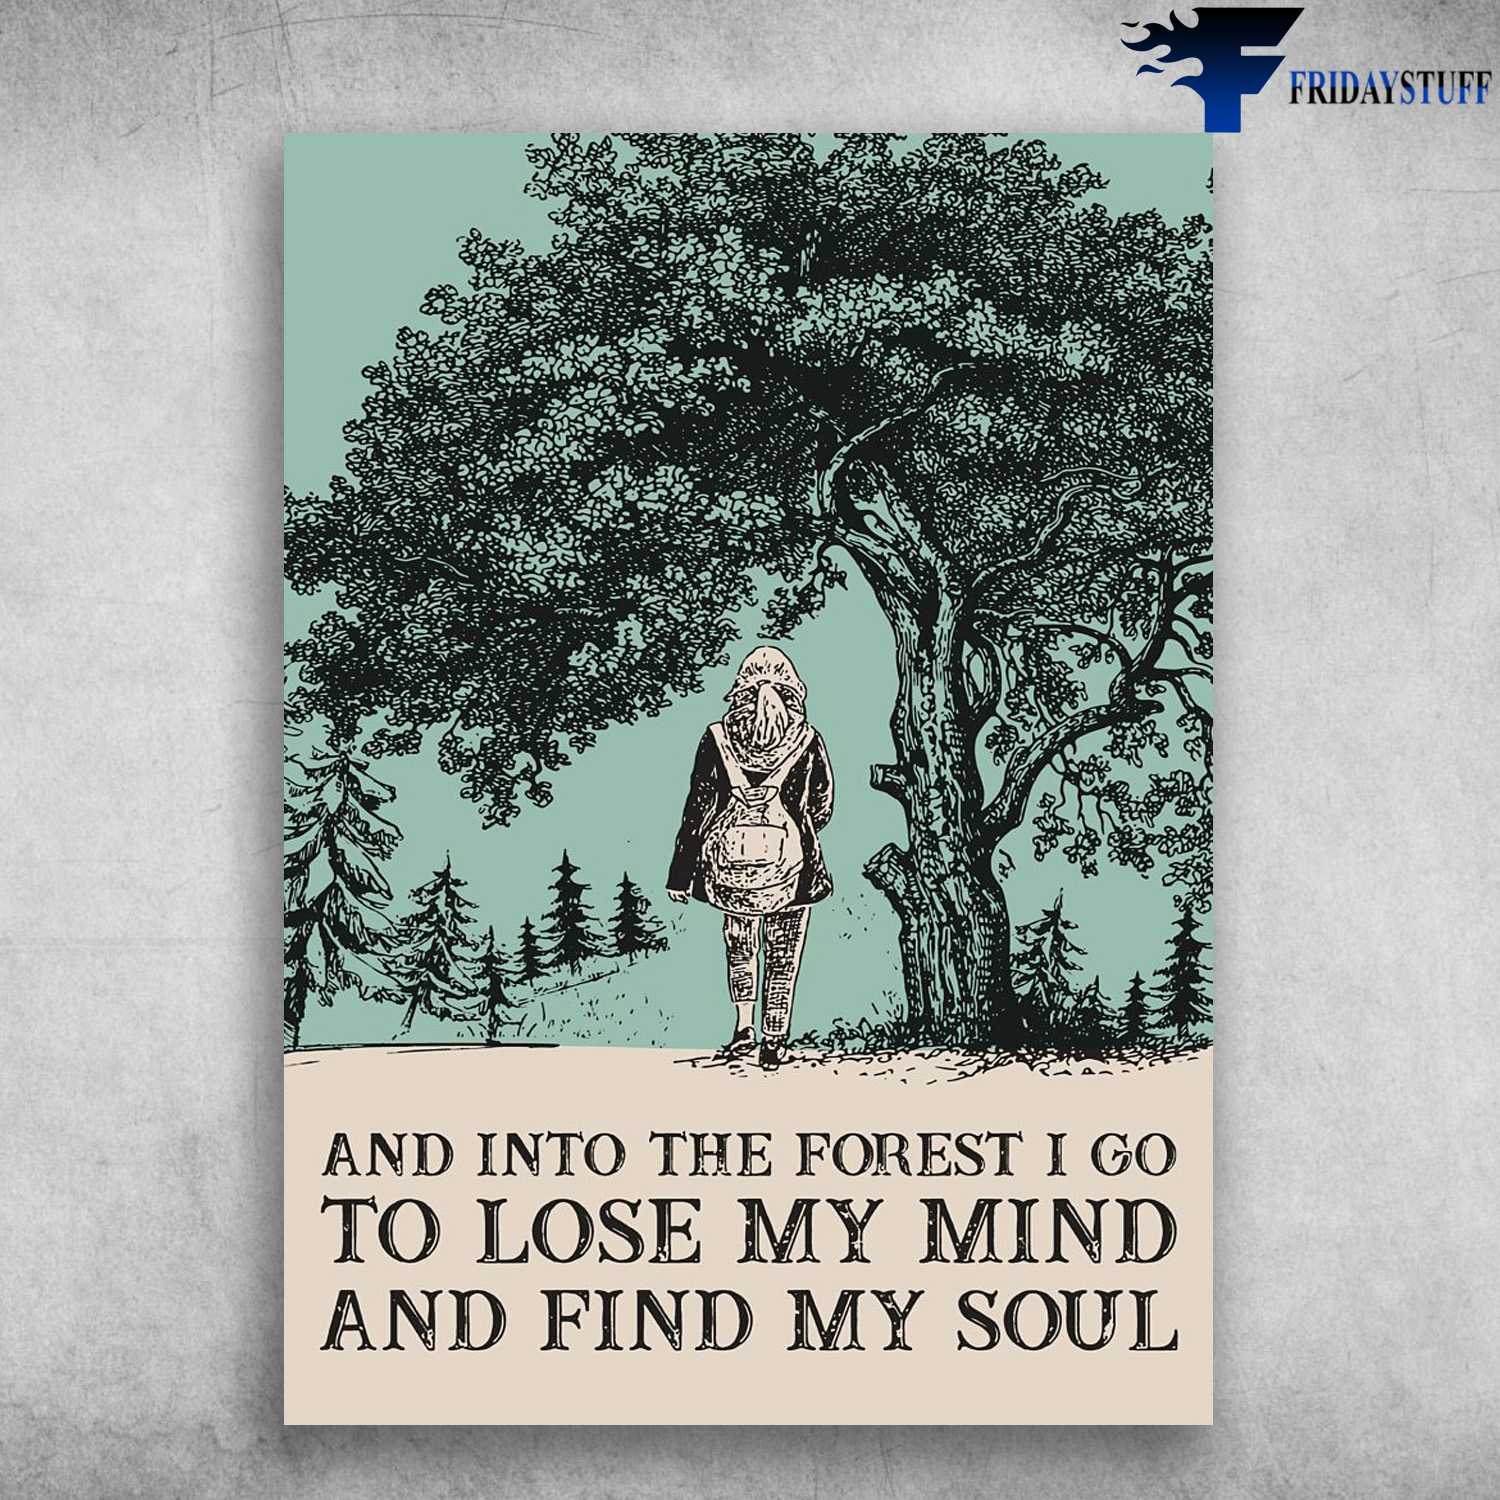 Hiking Into The Forest - And Into The Forest, I Go To Lose My Mind, And Find My SoulHiking Into The Forest - And Into The Forest, I Go To Lose My Mind, And Find My Soul